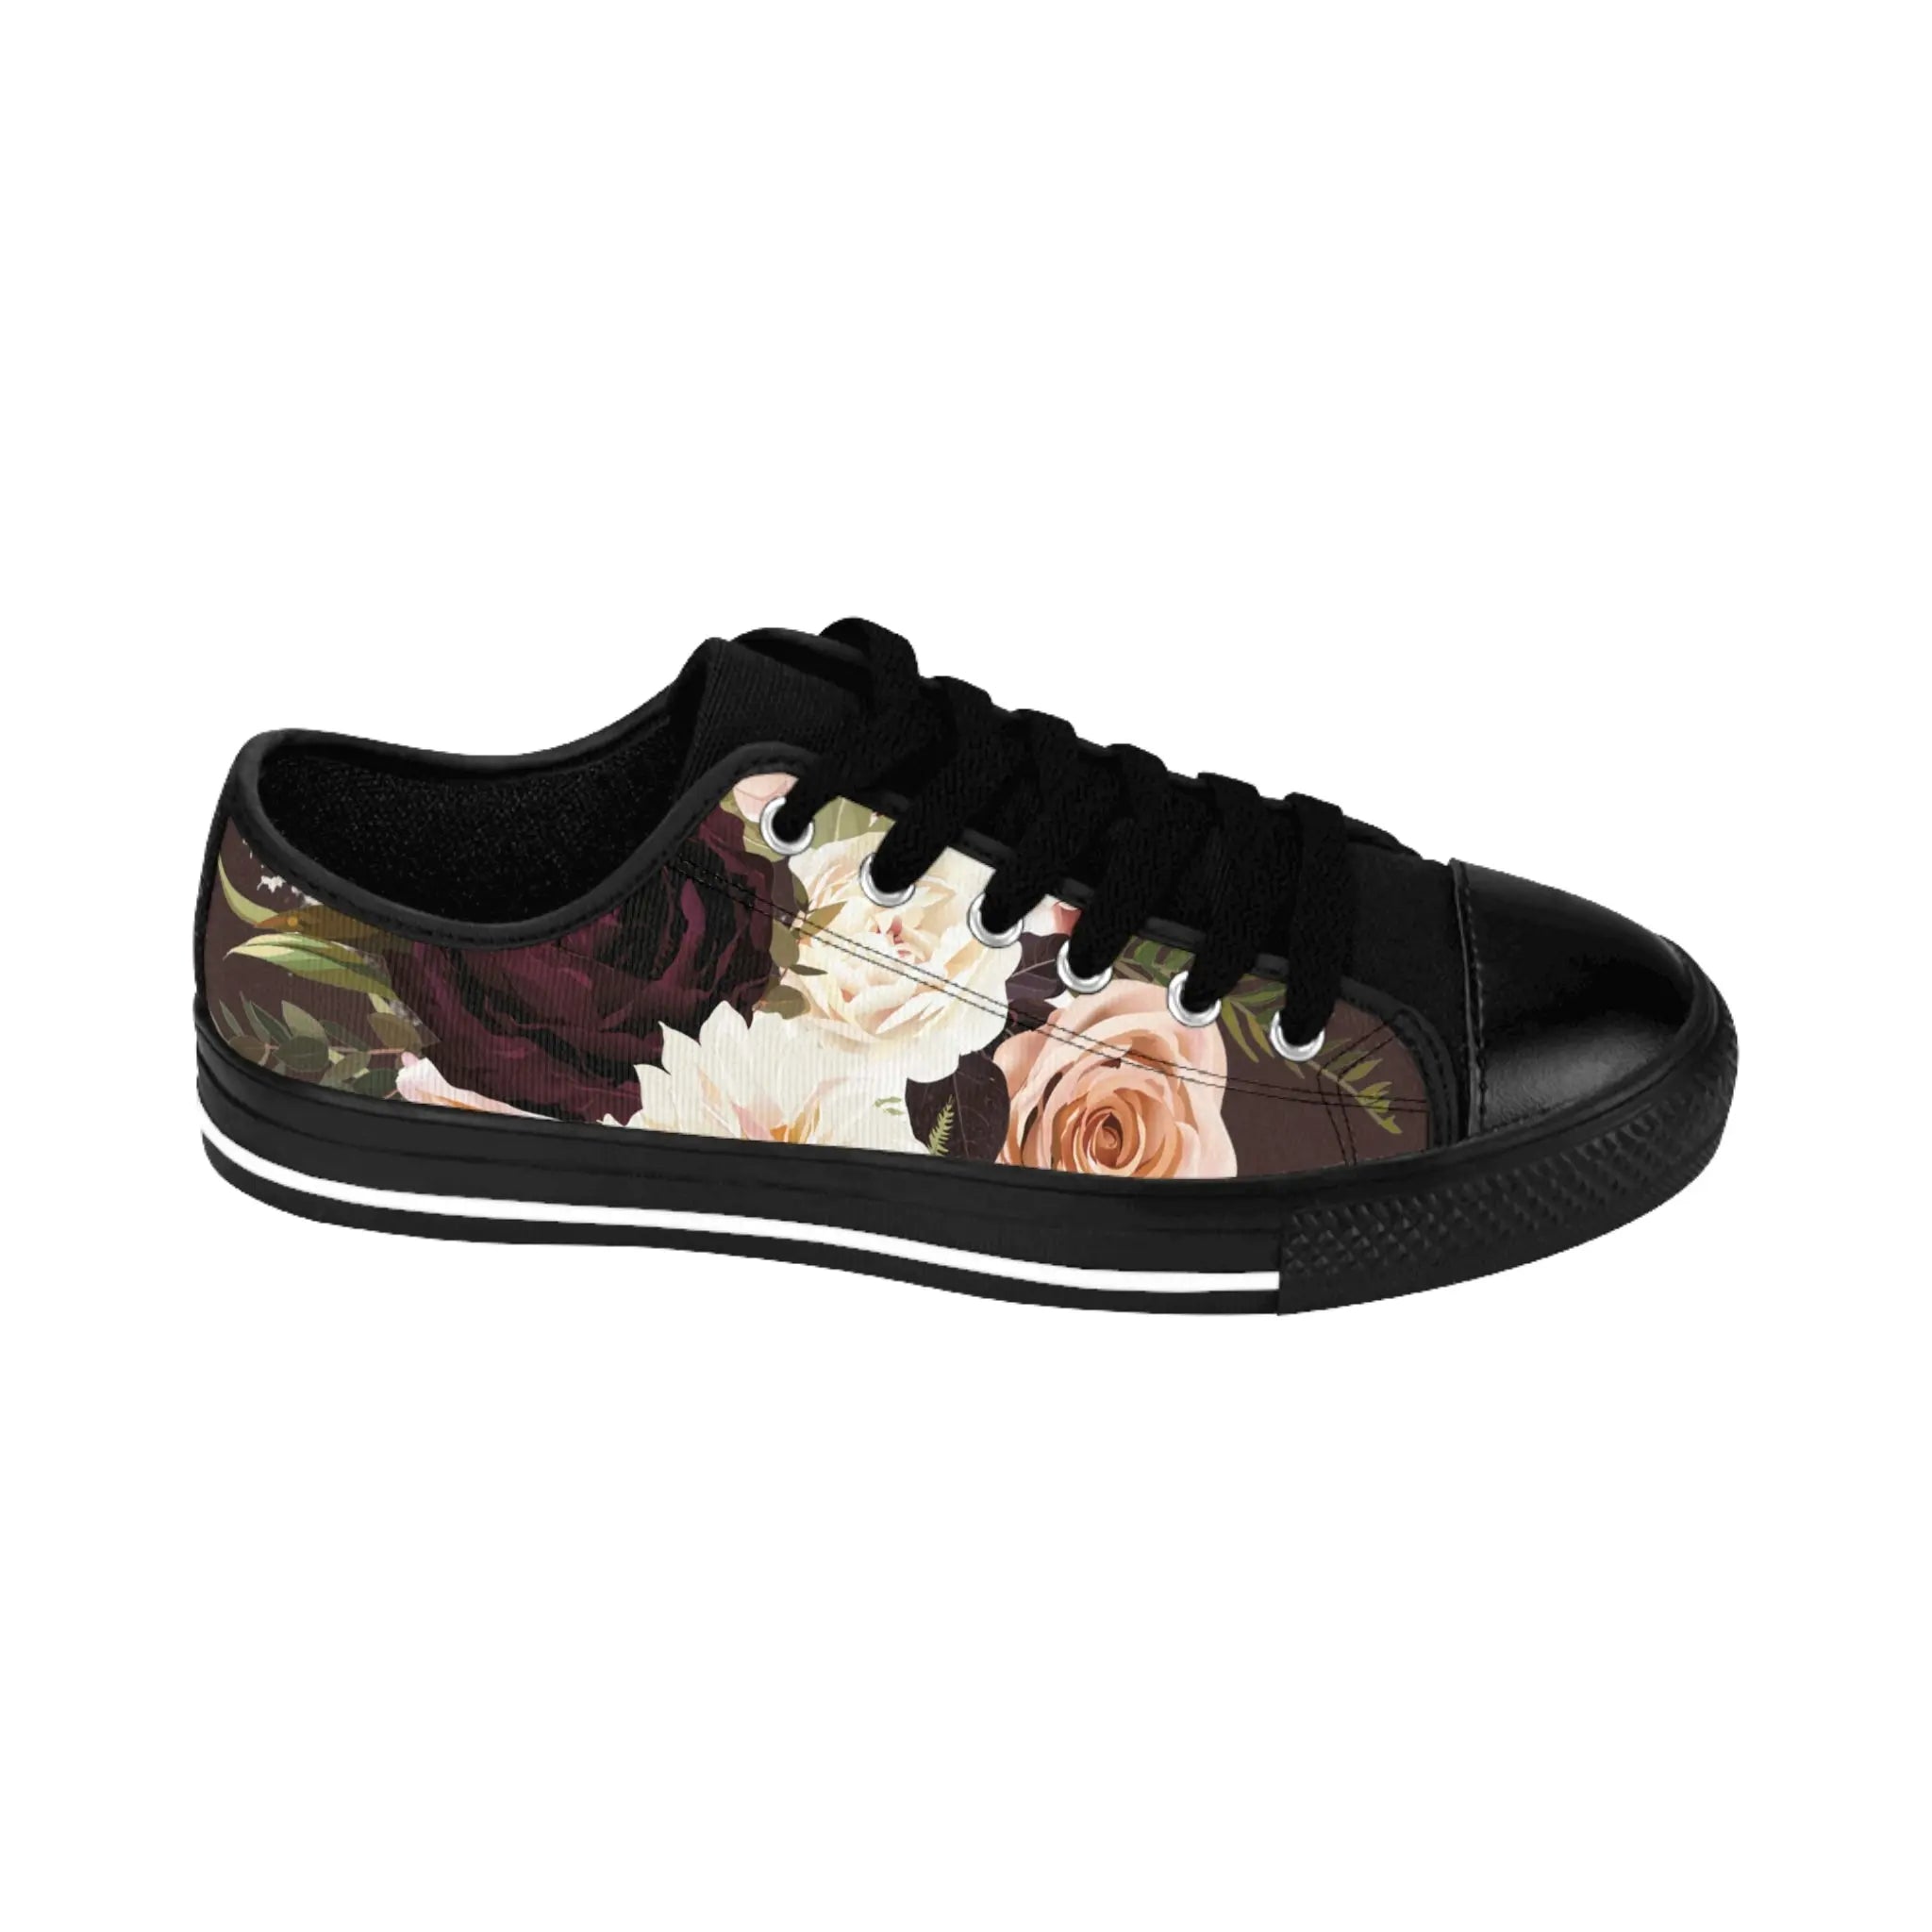  BOHO STAY WILD (Dark Bloom) Chocolate Brown Women's Low Top Canvas Shoes ShoesUS7Blacksole